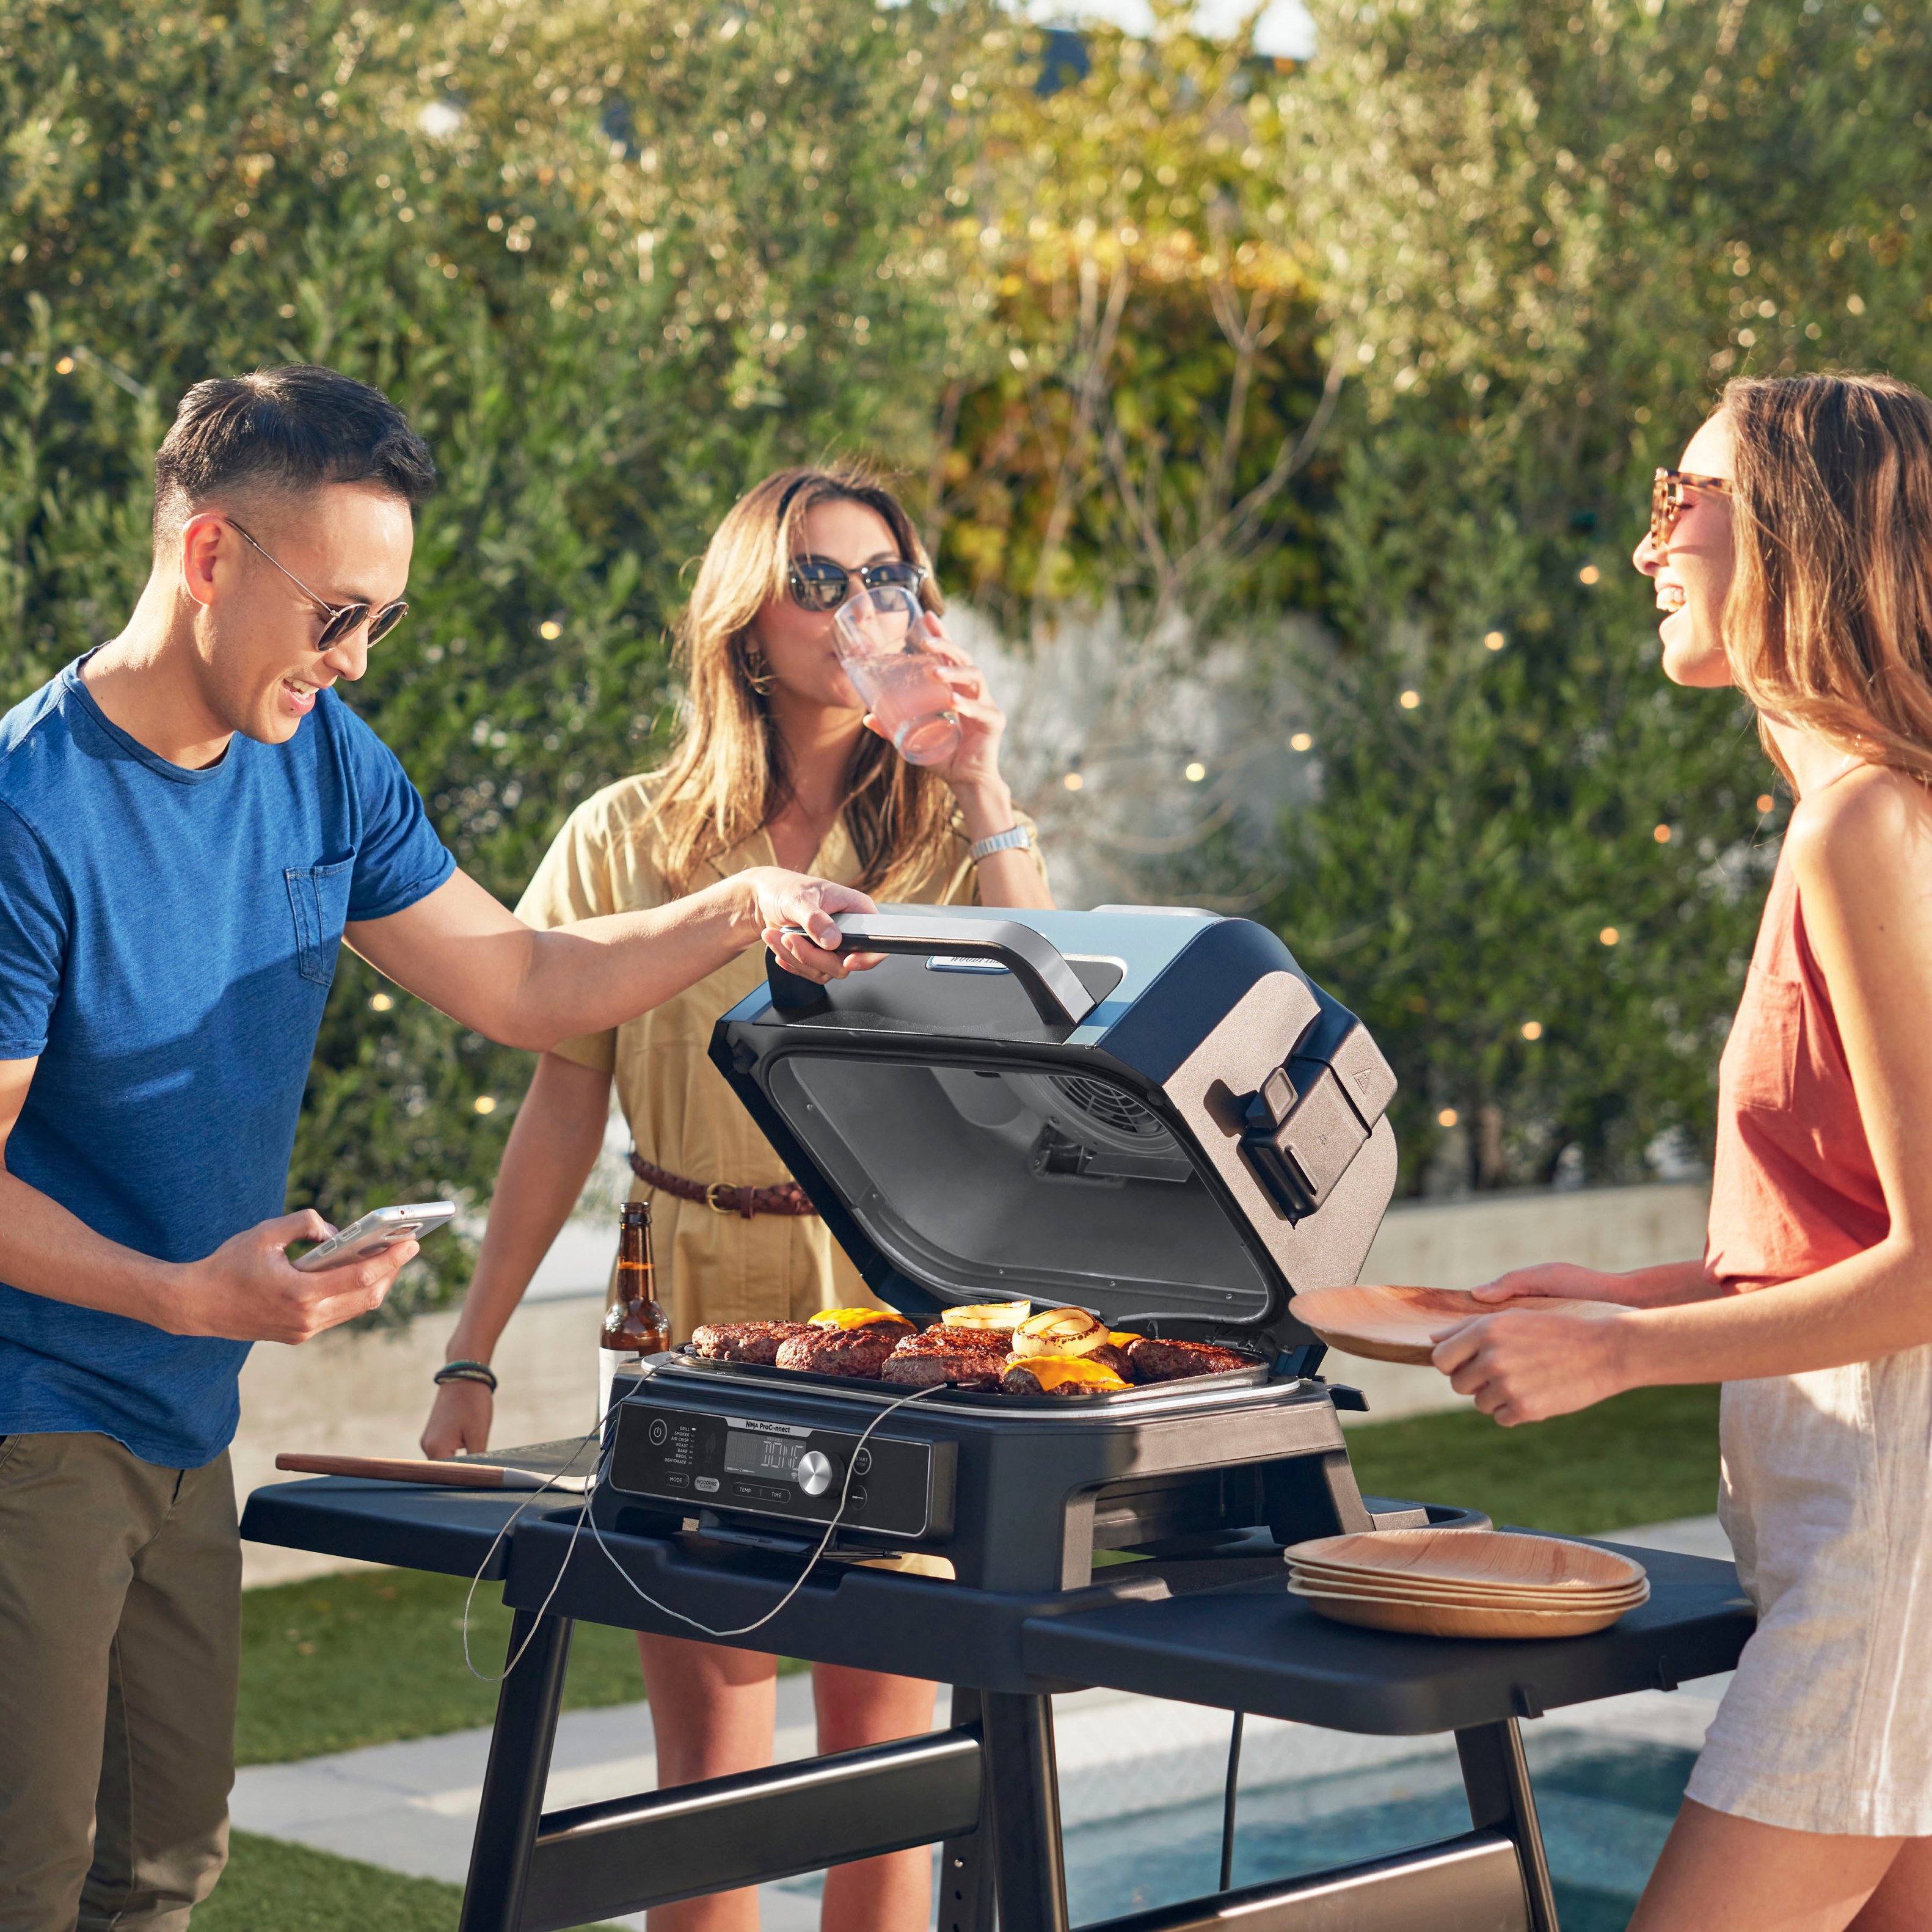 Ninja Woodfire Pro Connect XL Electric Grill & Smoker - OG952 : BBQGuys